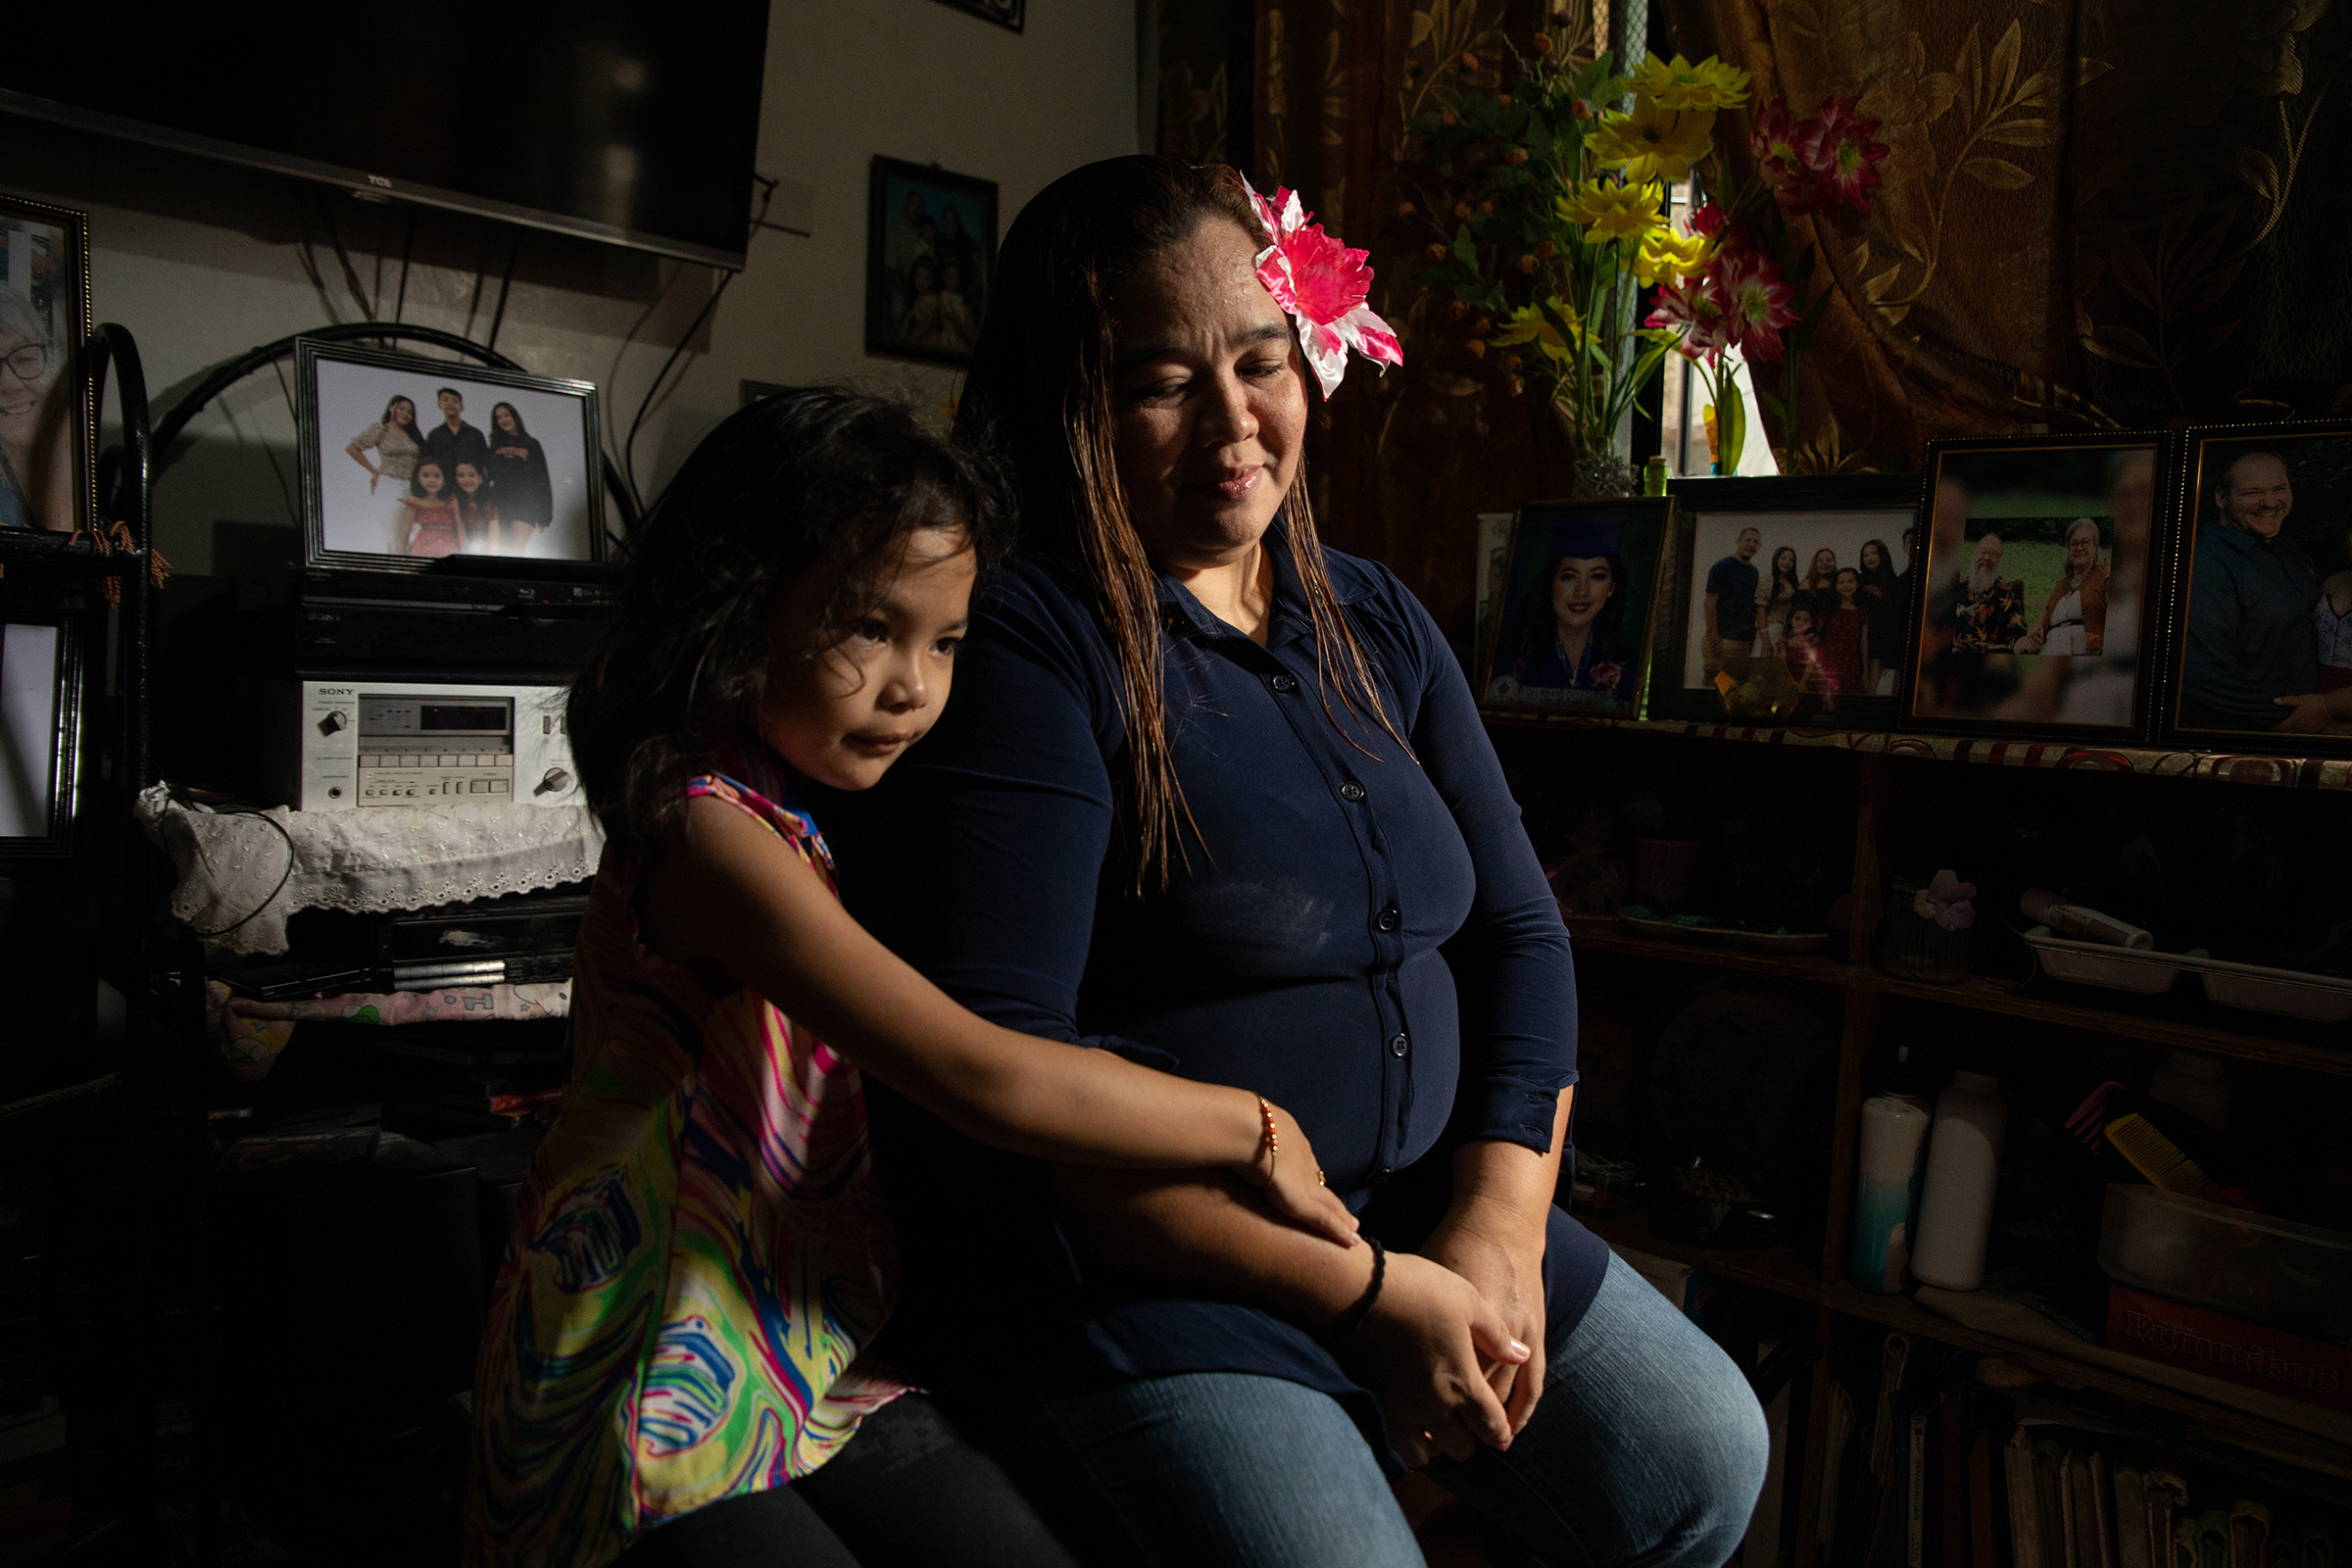 Michelleann Miller Pangilinan, an Amerasian who has struggled to become a U.S. citizen despite having the support of her American father and a DNA test to prove his paternity, photographed with her daughter Shania, at their home in Olongapo City on Feb. 19. (Geric Cruz for TIME)